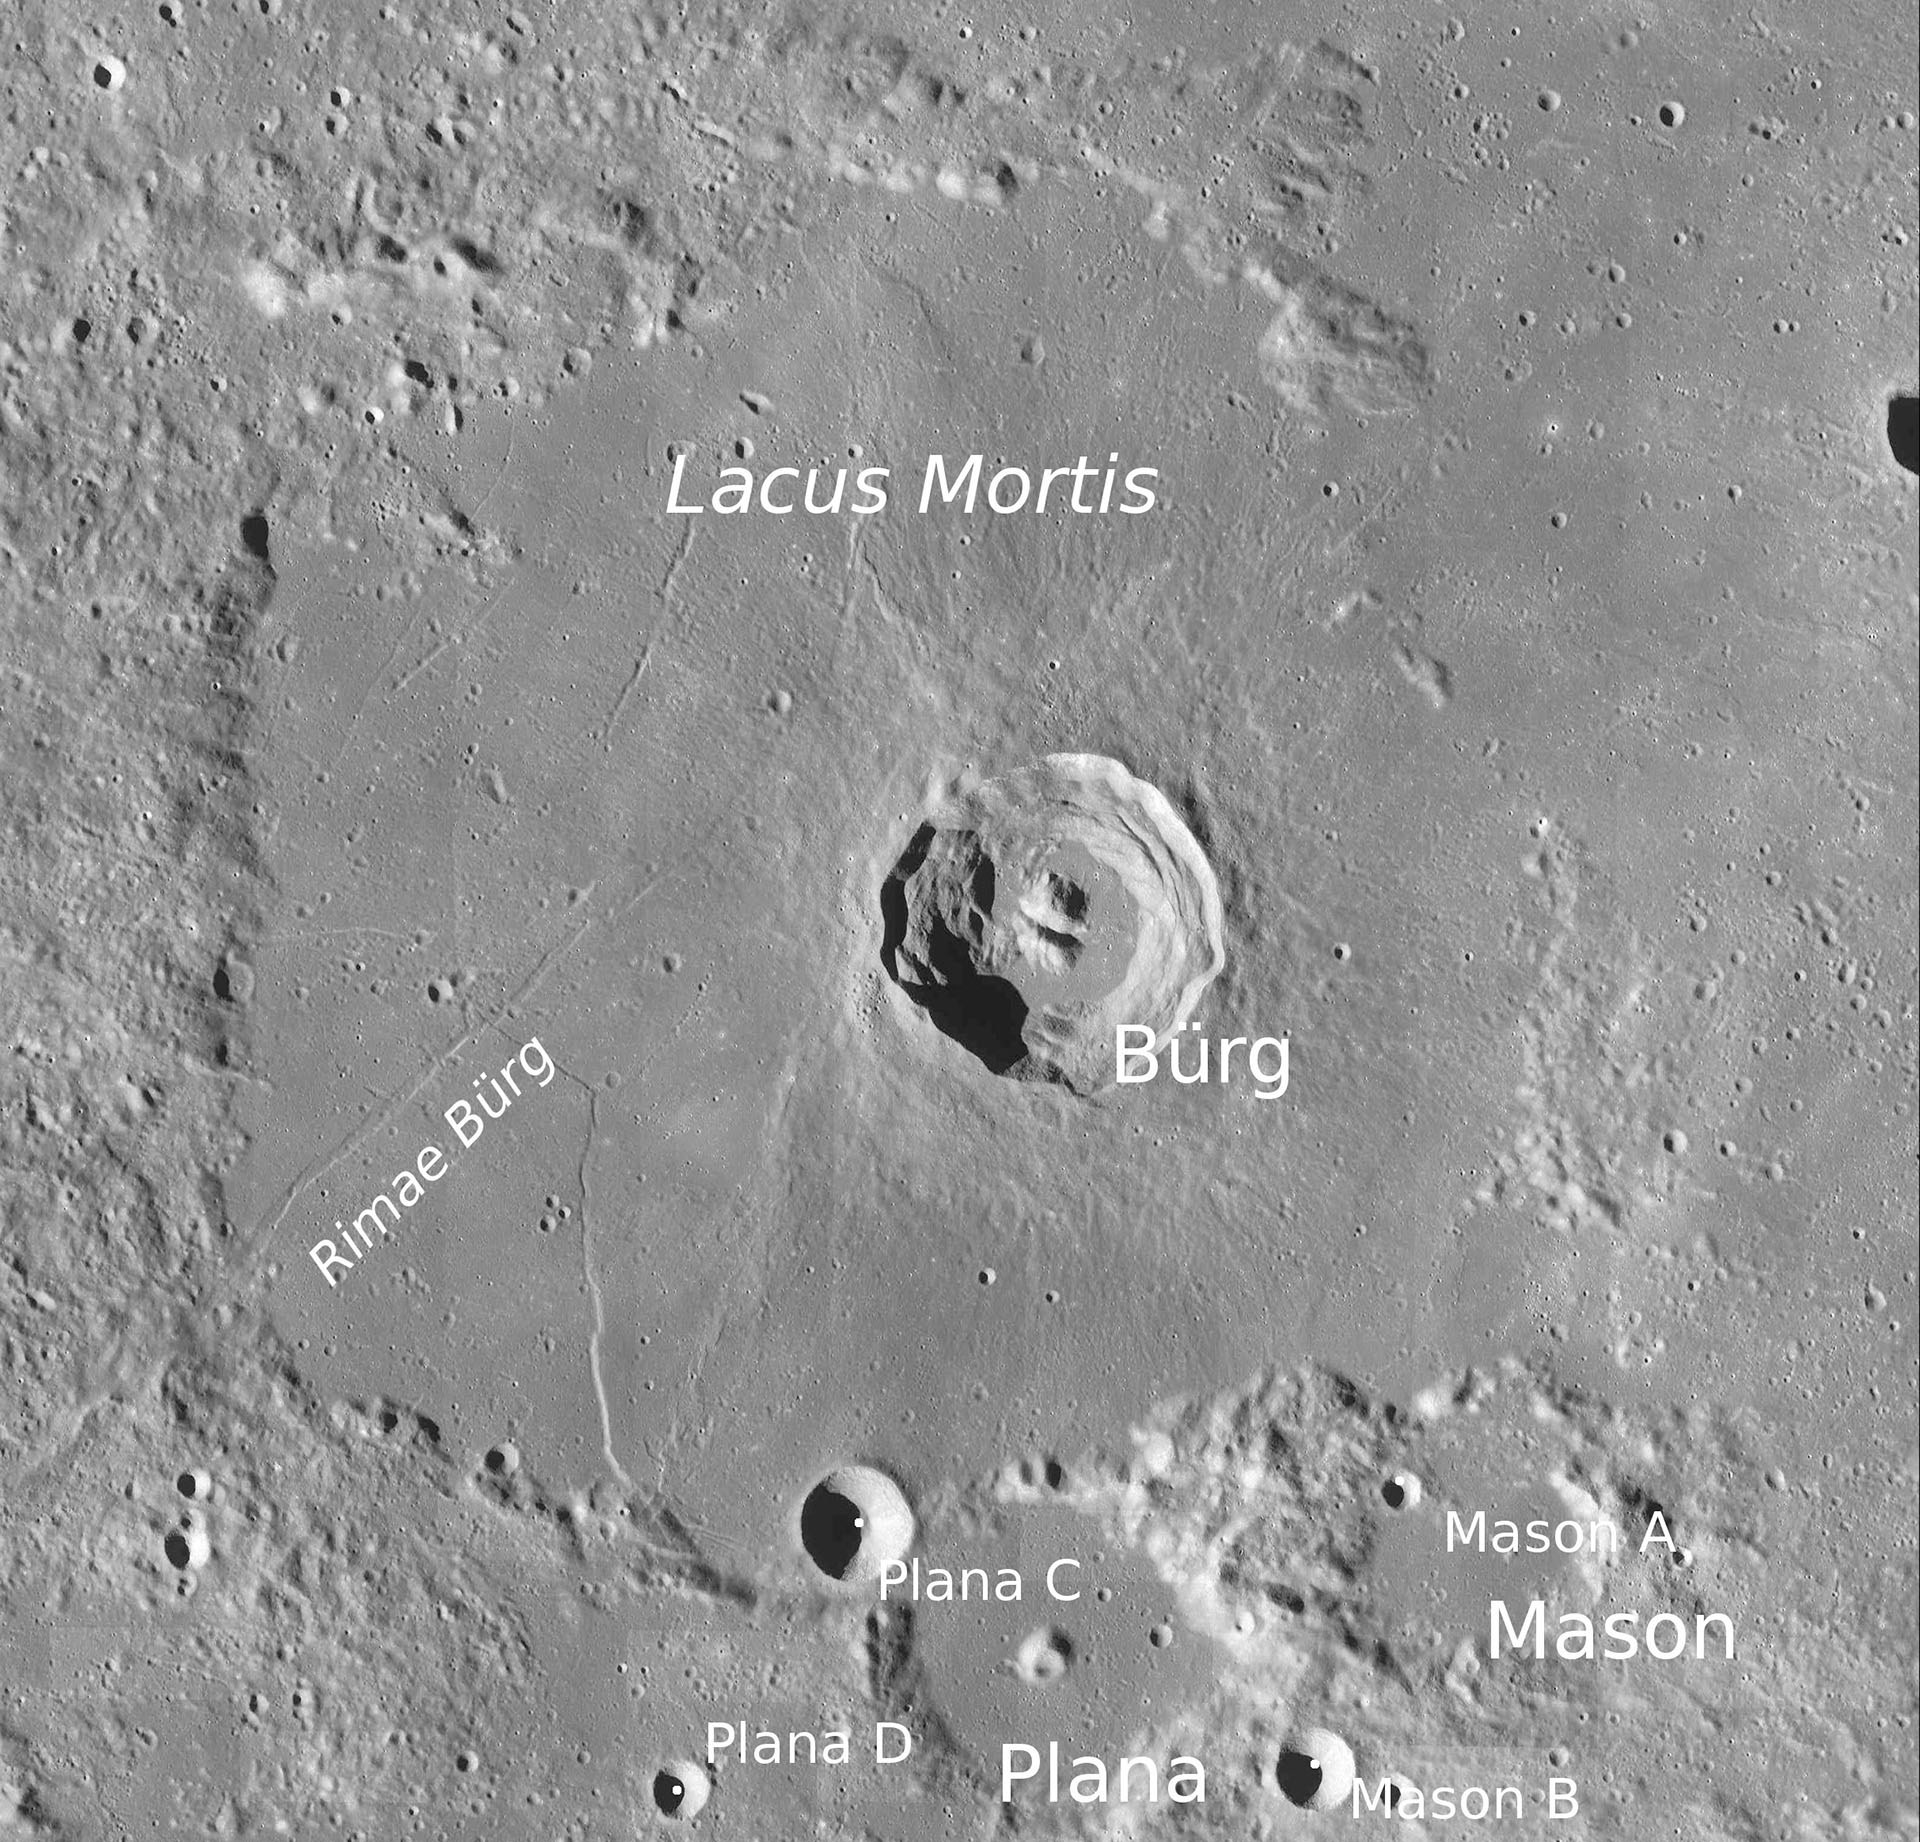 Lacus Mortis on the Moon